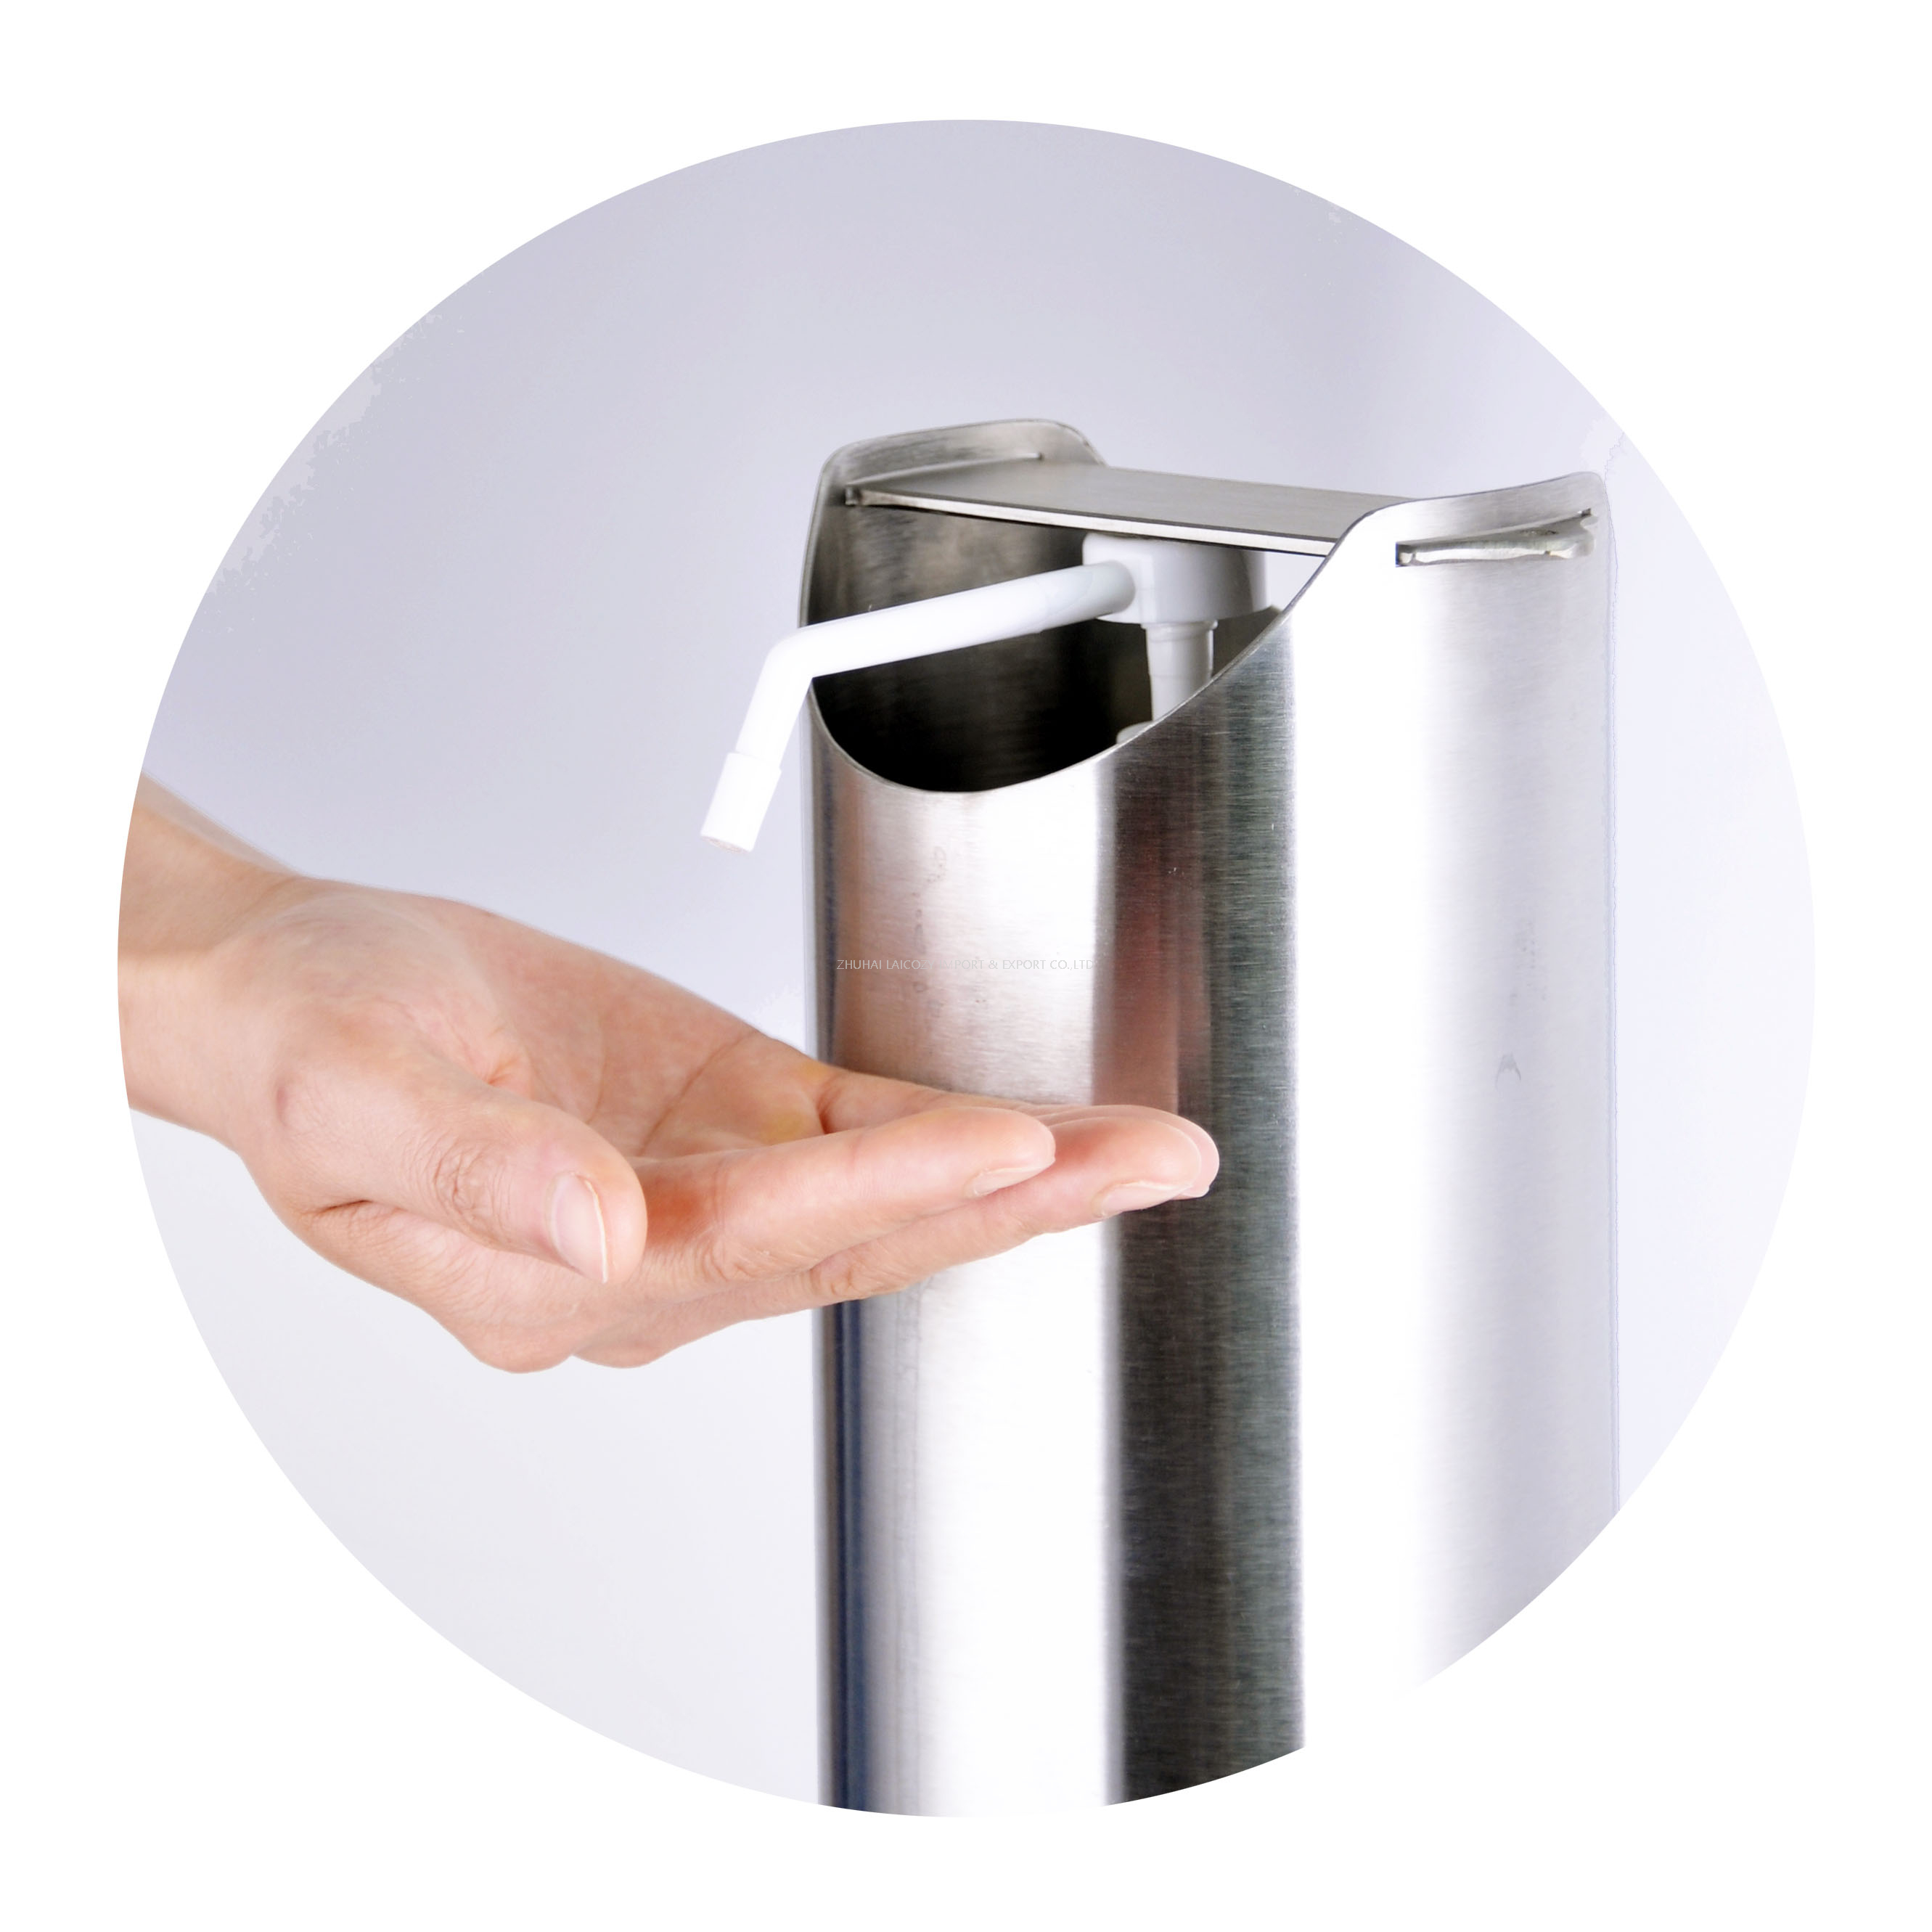 Stainless Steel Touchless Pedal Hand Soap Dispenser Stand 